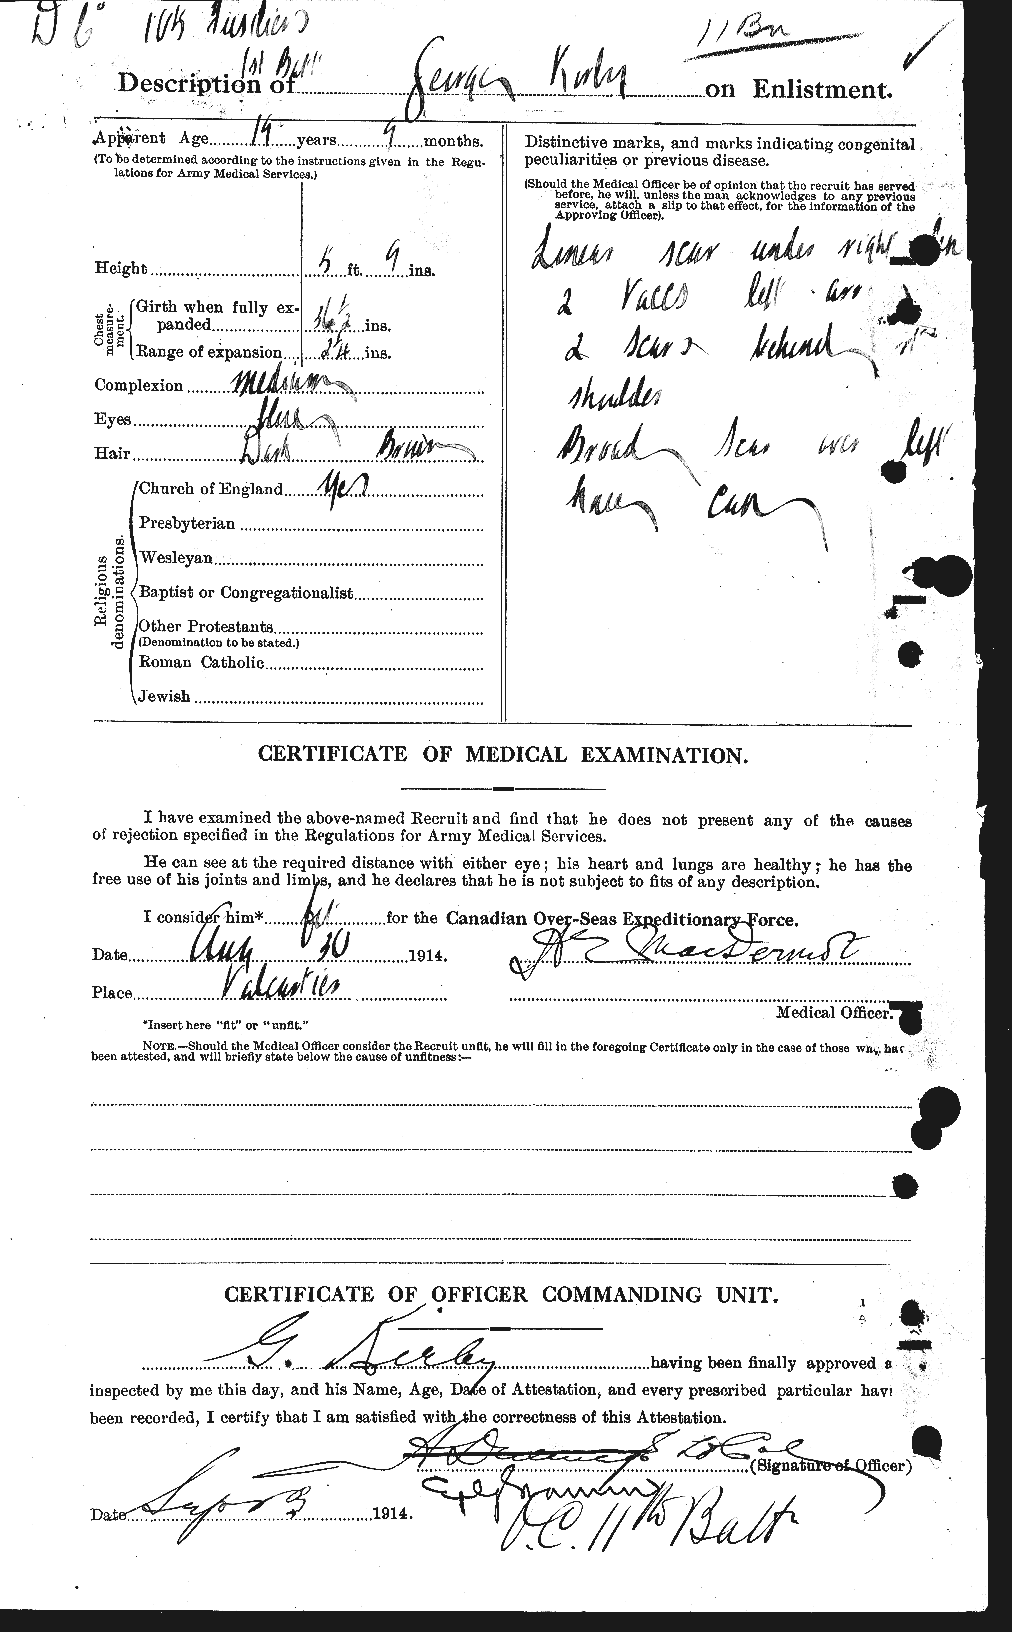 Personnel Records of the First World War - CEF 437199b